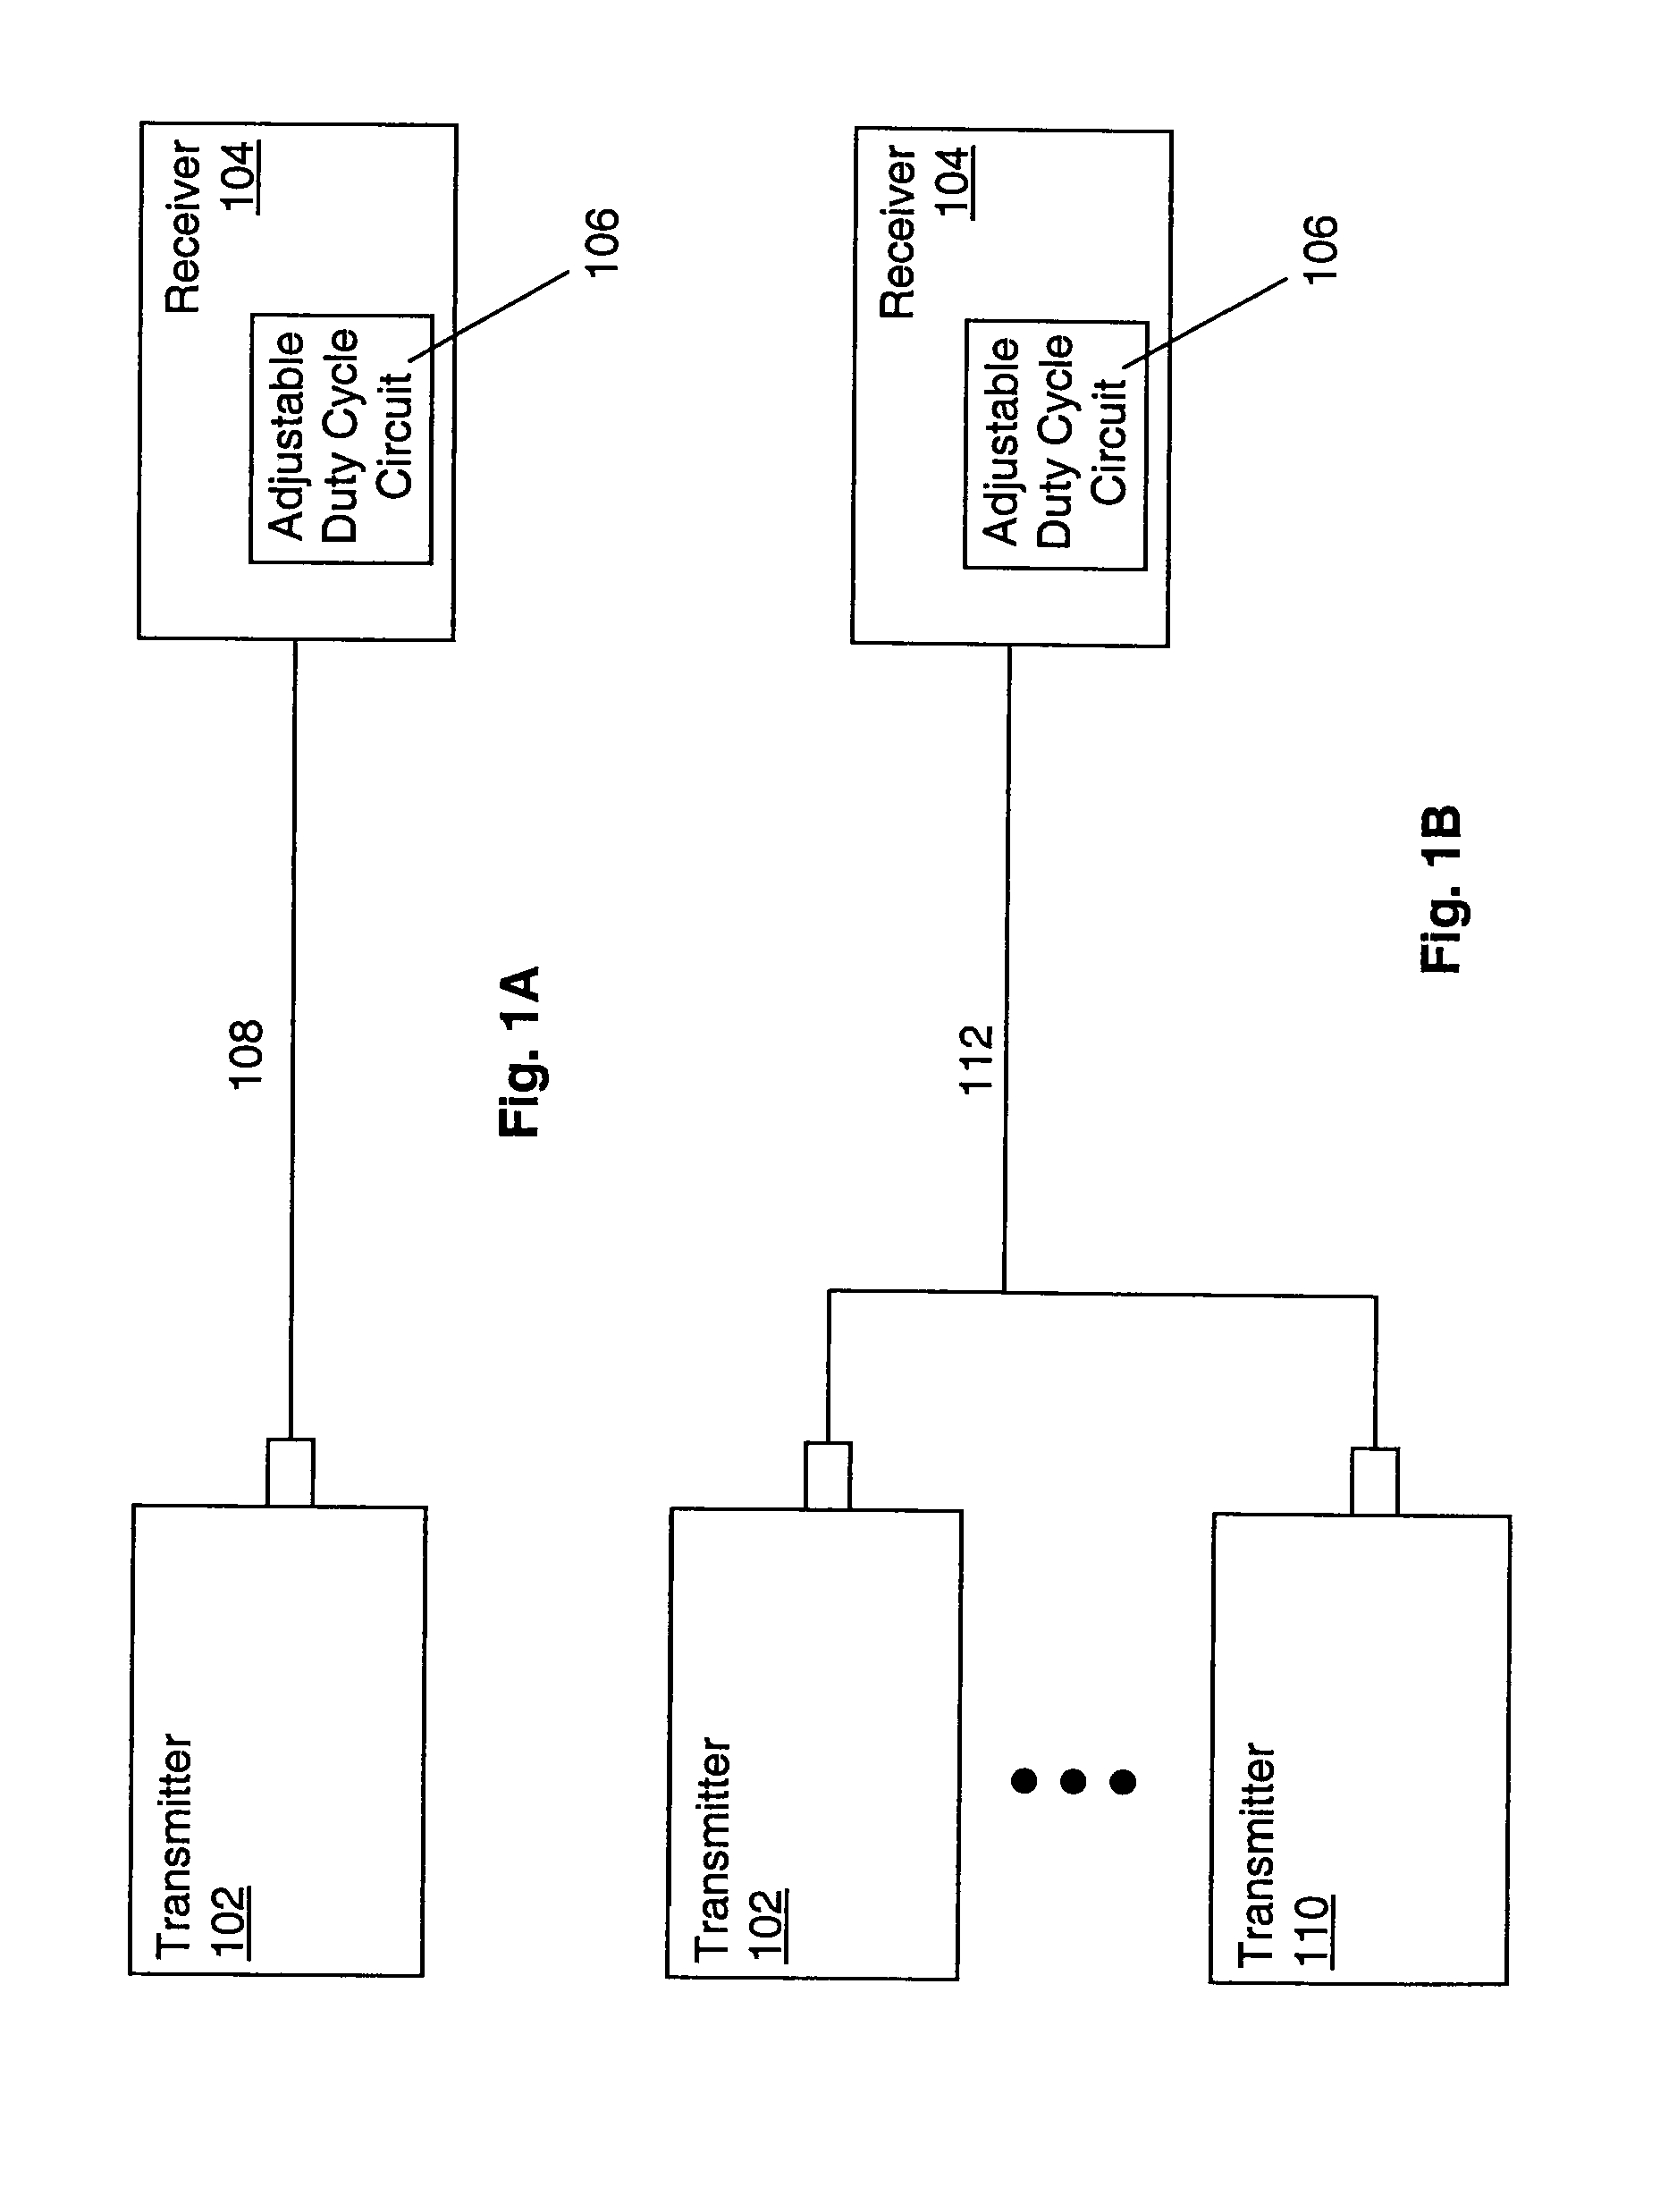 System and method for adaptive duty cycle optimization